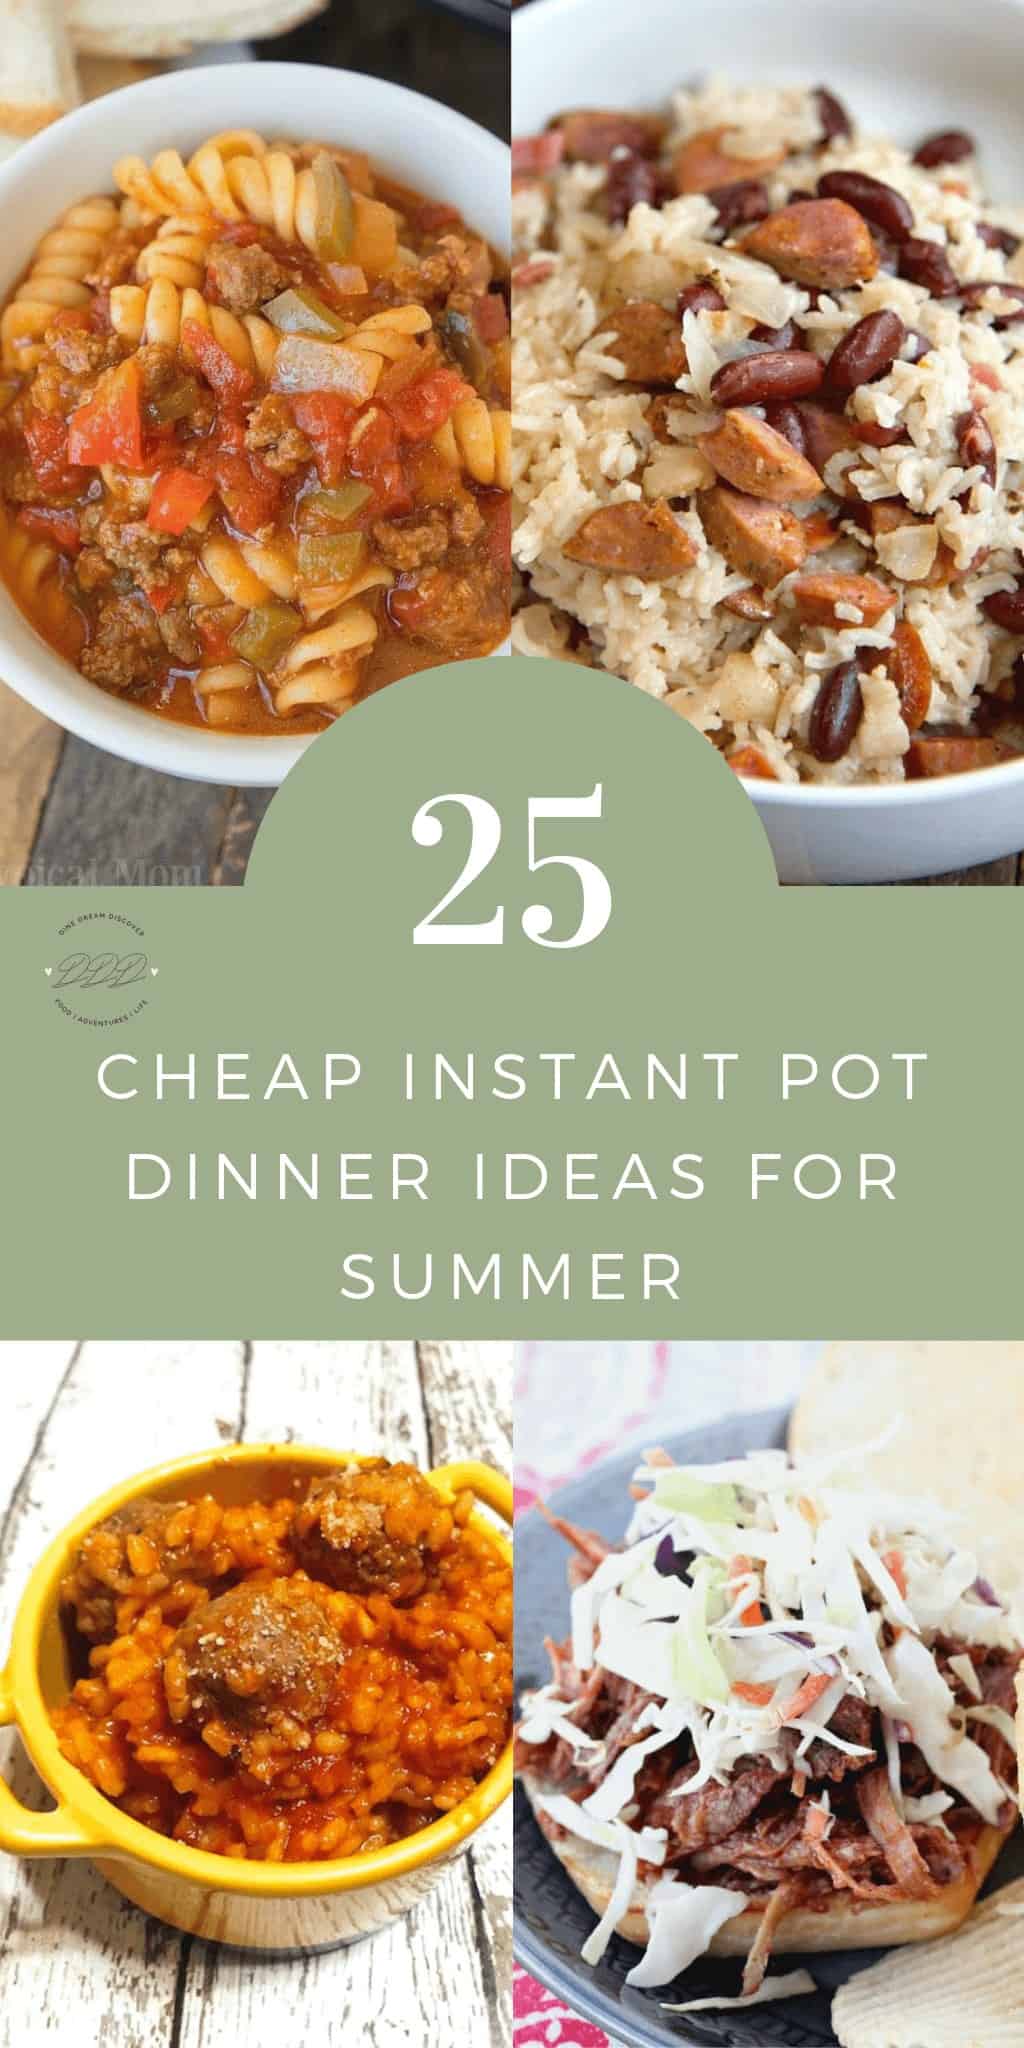 Summer isn't quite over yet and if your weather is anything like ours....it's hot! Here are 25 cheap Instant Pot dinner ideas that are perfect for this time of year.